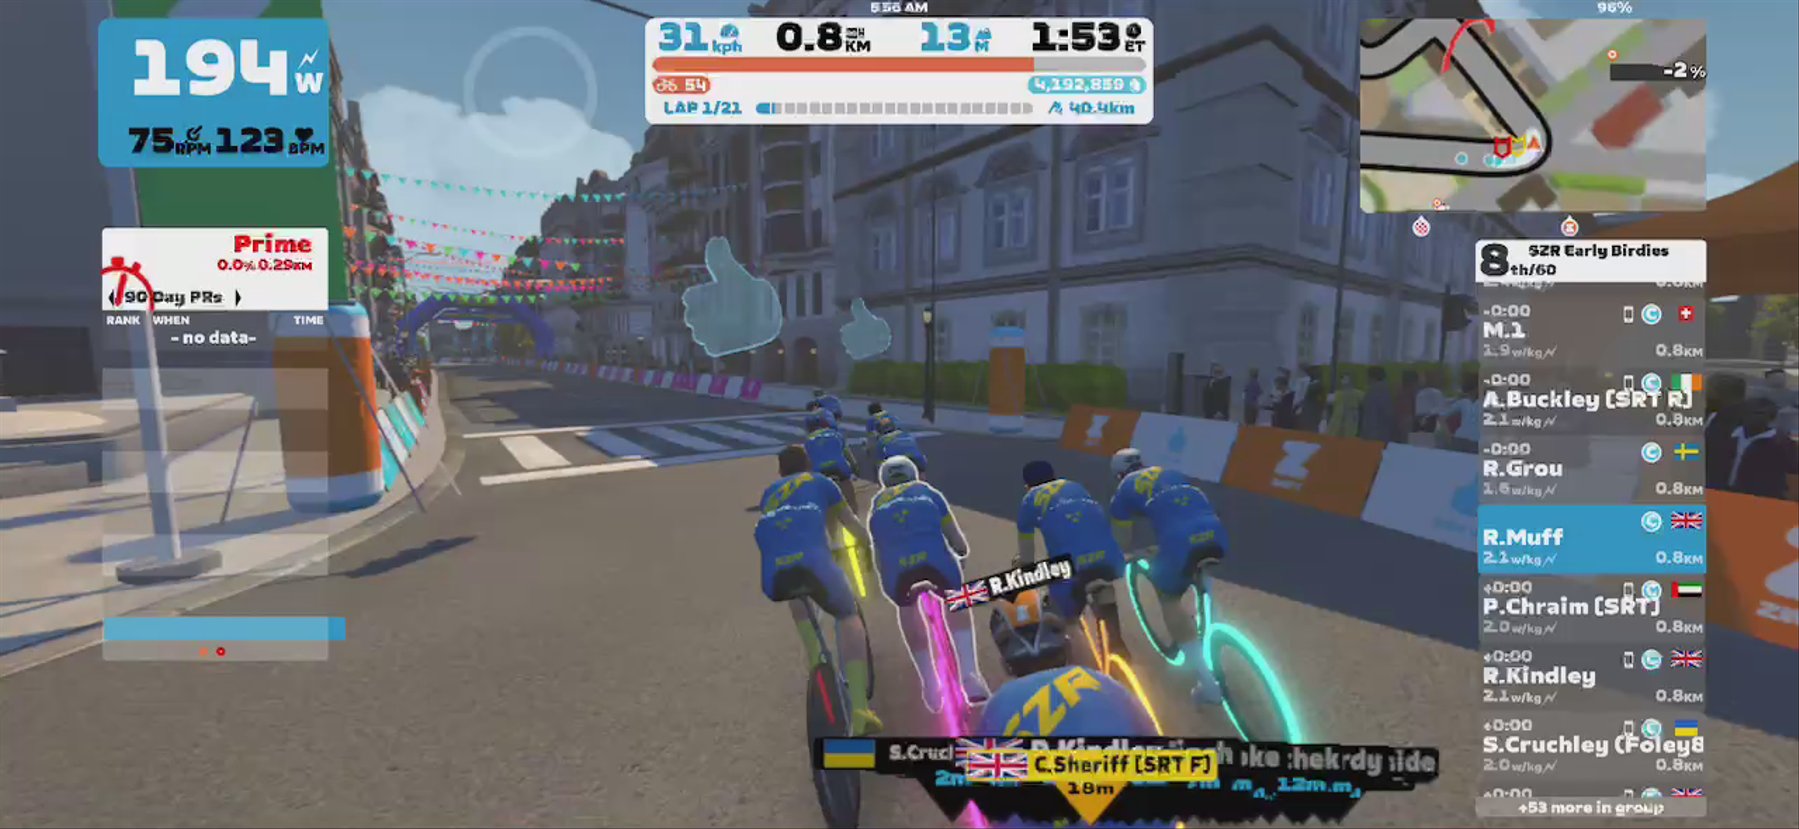 Zwift - Group Ride: SZR Early Birdies (C) on The Bell Lap in Crit City